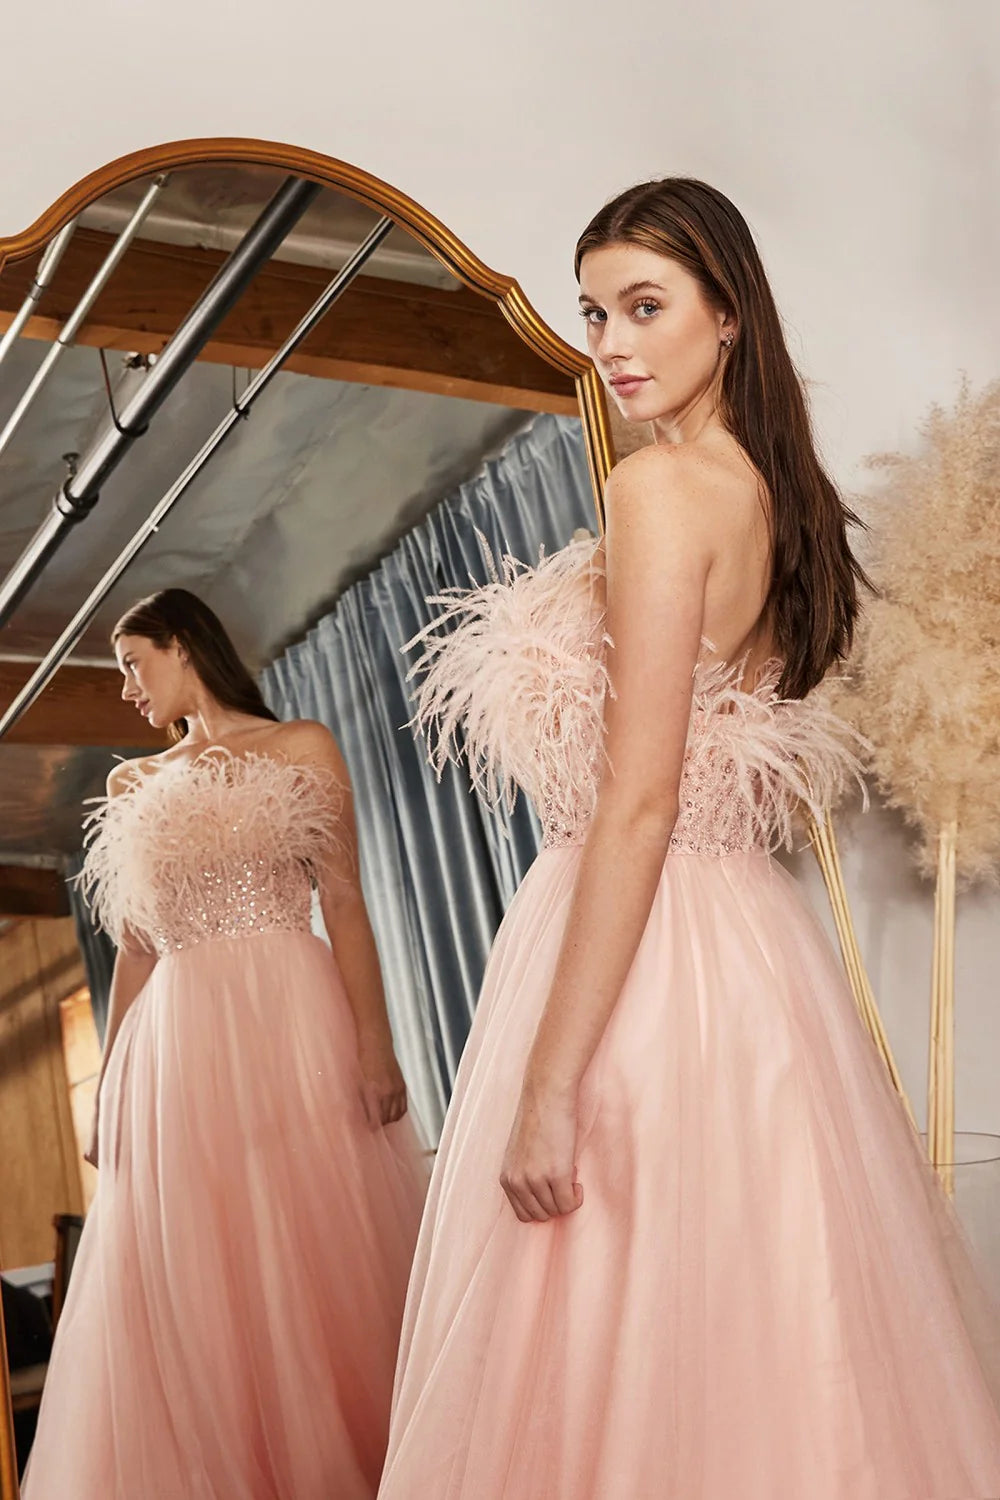 This gorgeous ladivine dress features luxurious long blush tulle fabric and sequin embroidery for an eye-catching look. Its A-line design and strapless silhouette offer a flattering fit for any special occasion. Lightweight and comfortable, the feather trim adds an elegant finish to this show-stopping gown.  Size: 4  Color: Blush